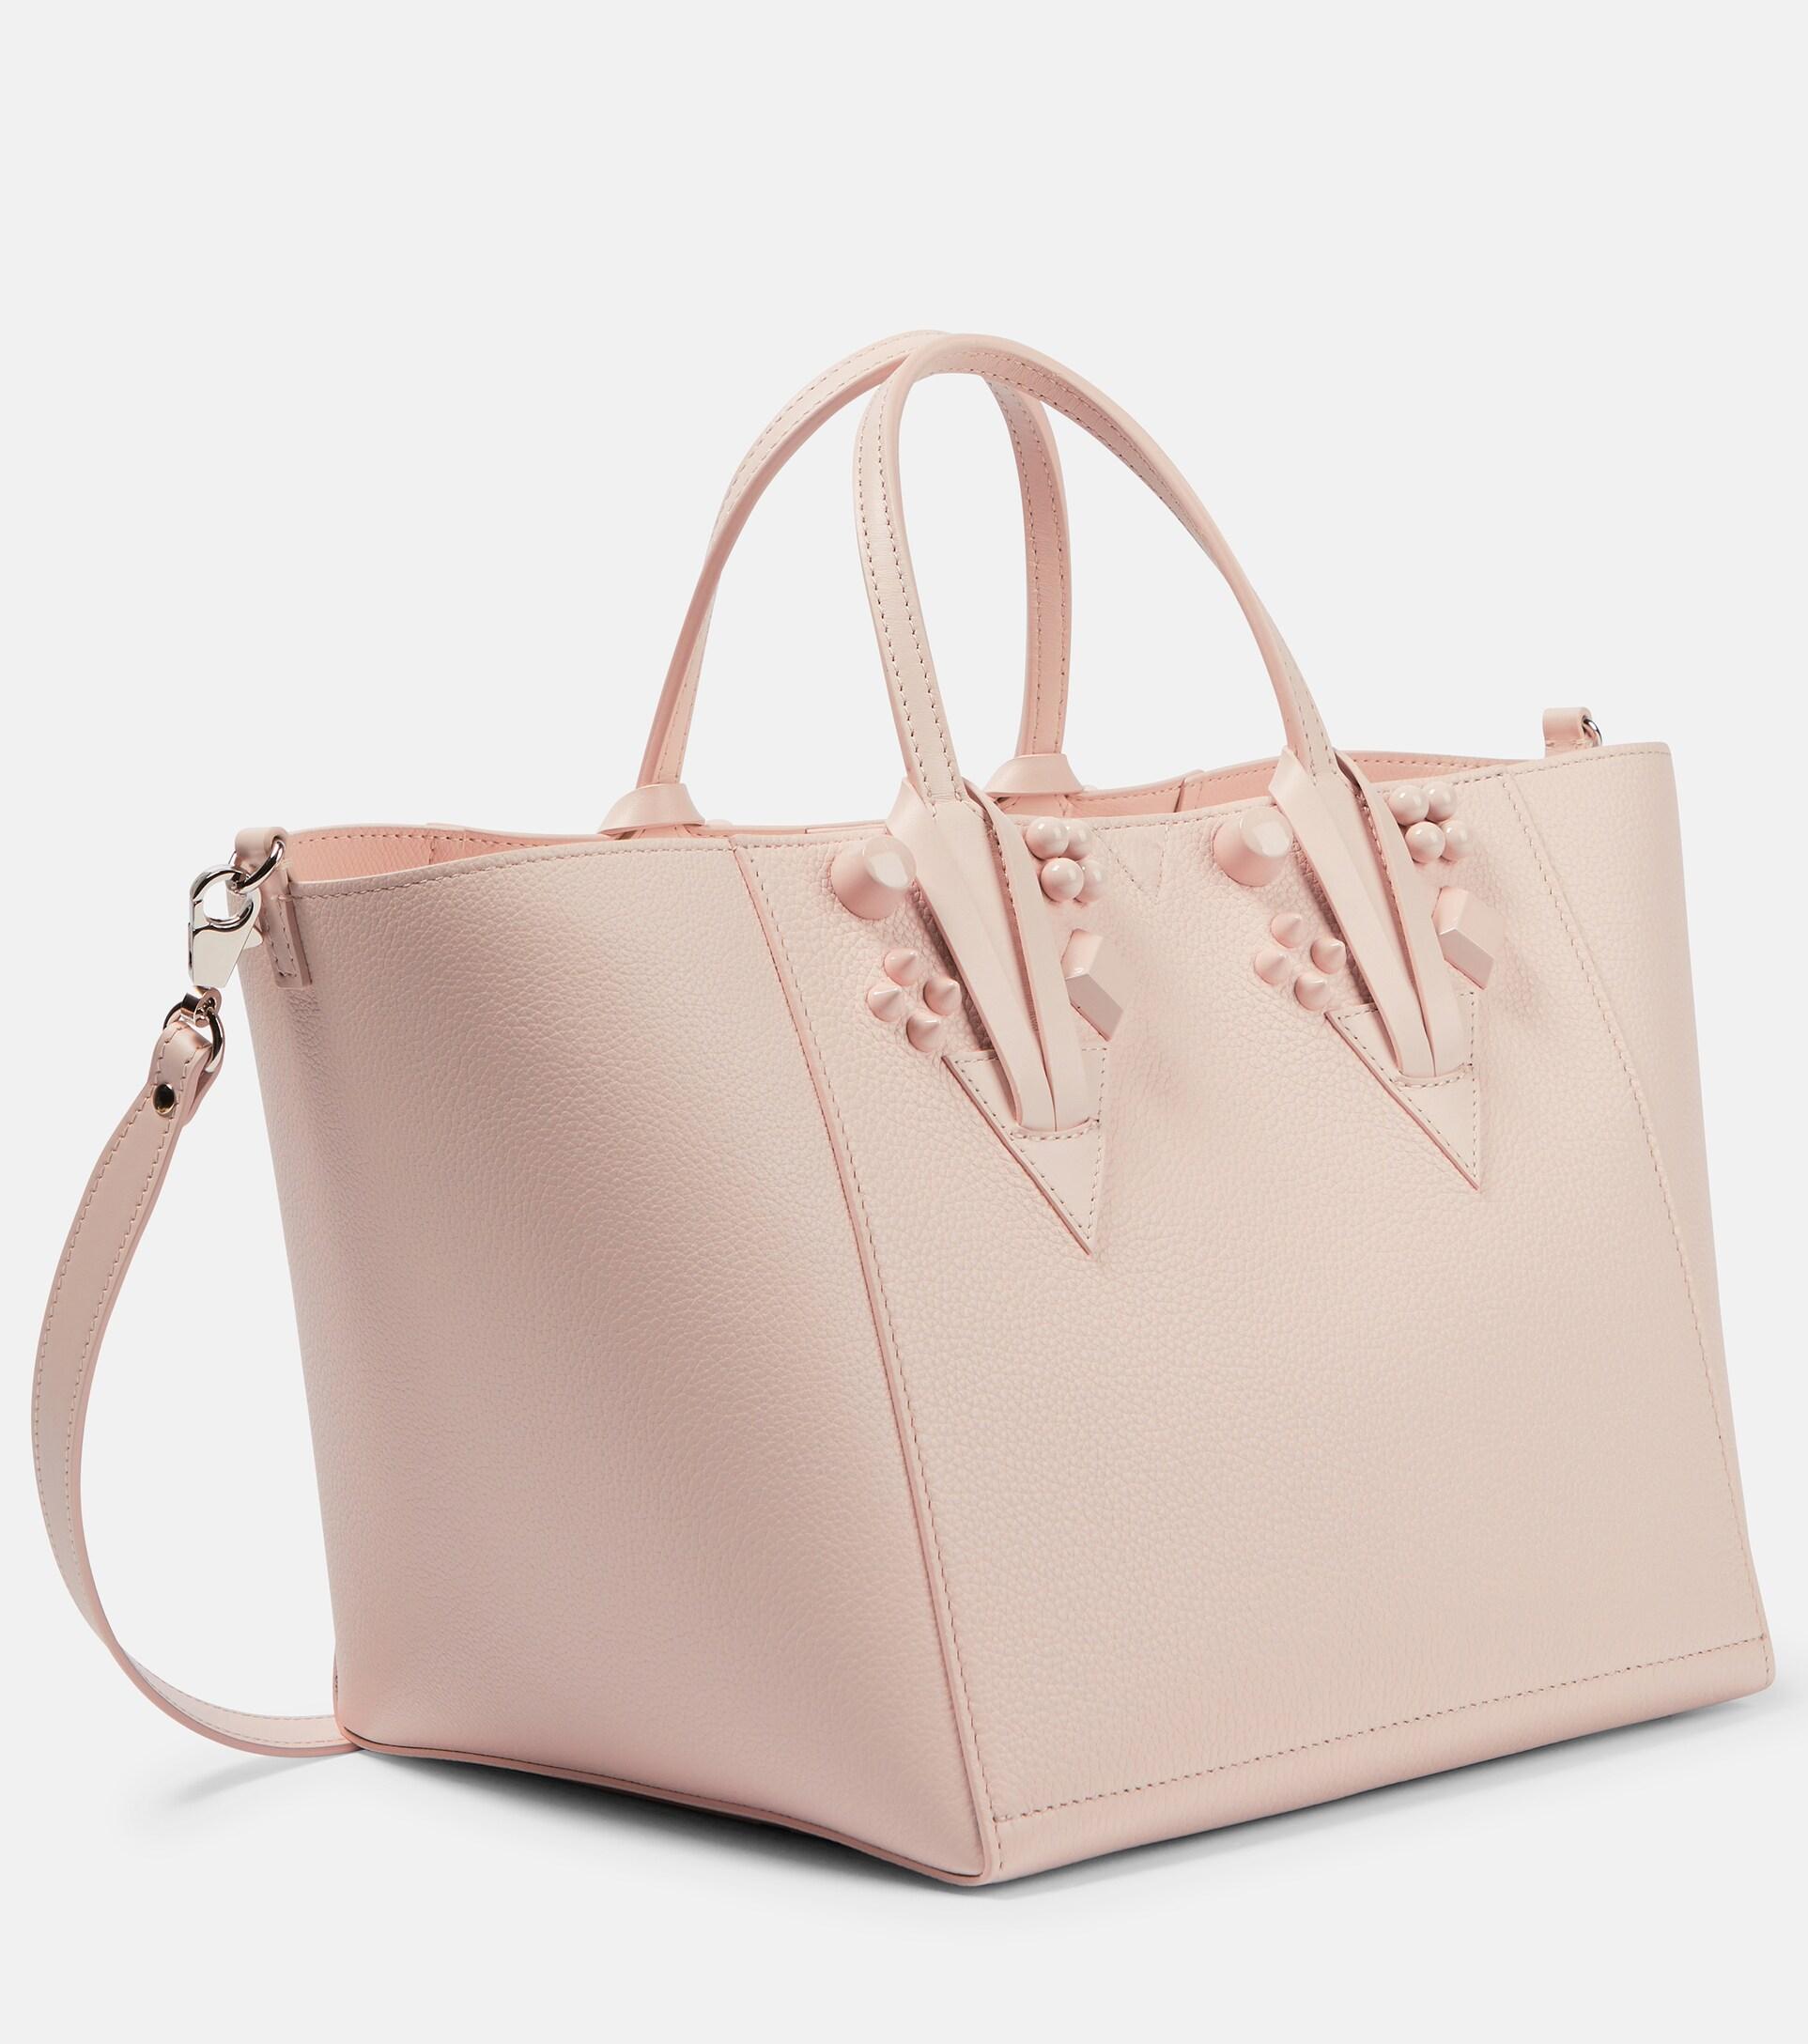 Postimpressionisme lette Tag væk Christian Louboutin Cabachic Small Leather Tote in Pink | Lyst